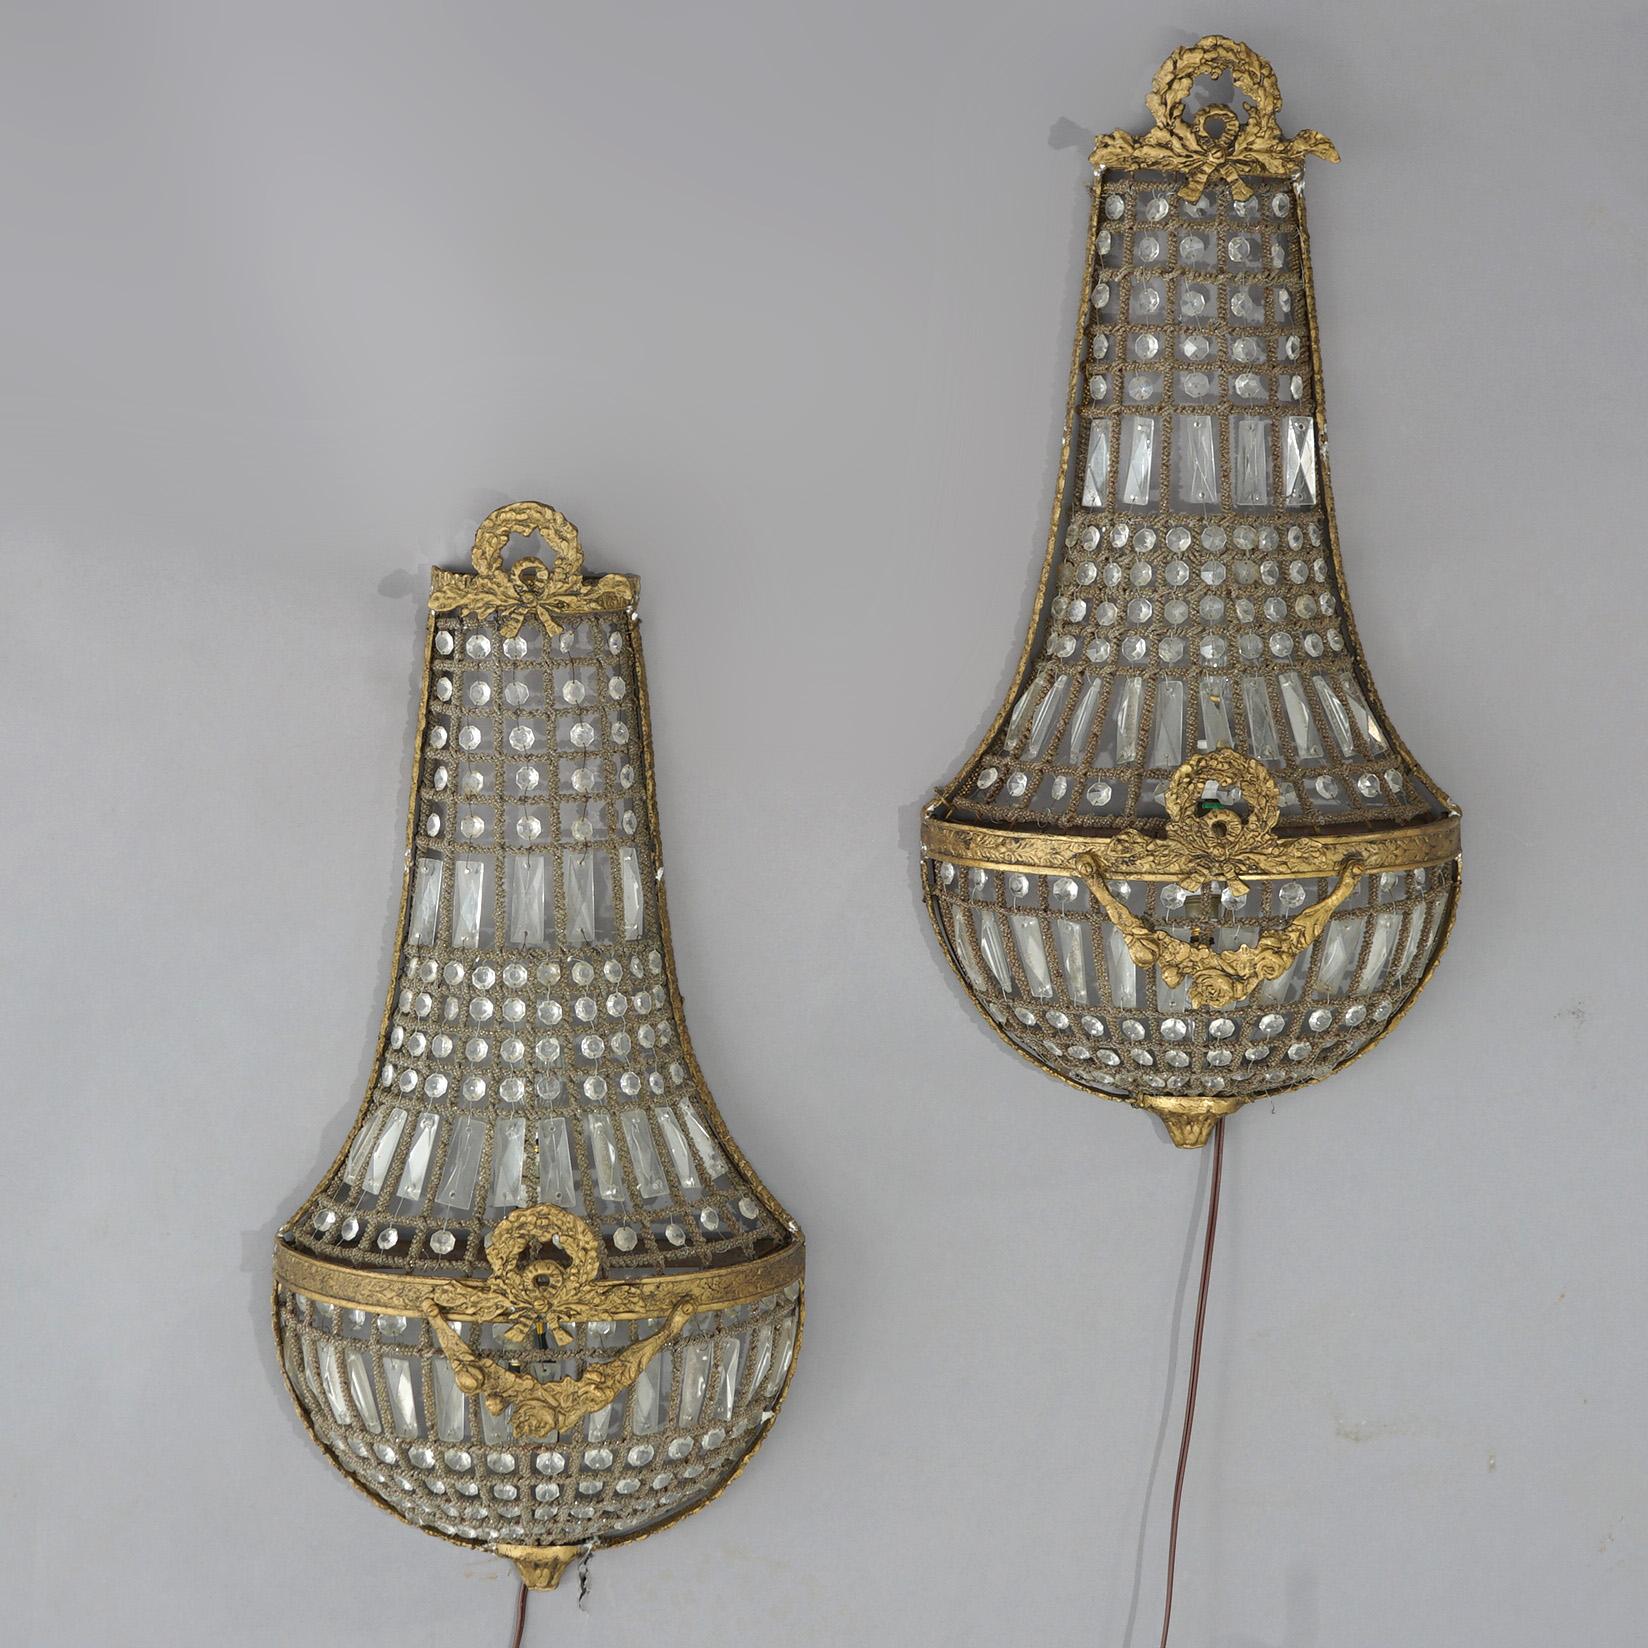 American Antique Pair French Louis XV Empire Style Bronzed Metal & Crystal Sconces c1920